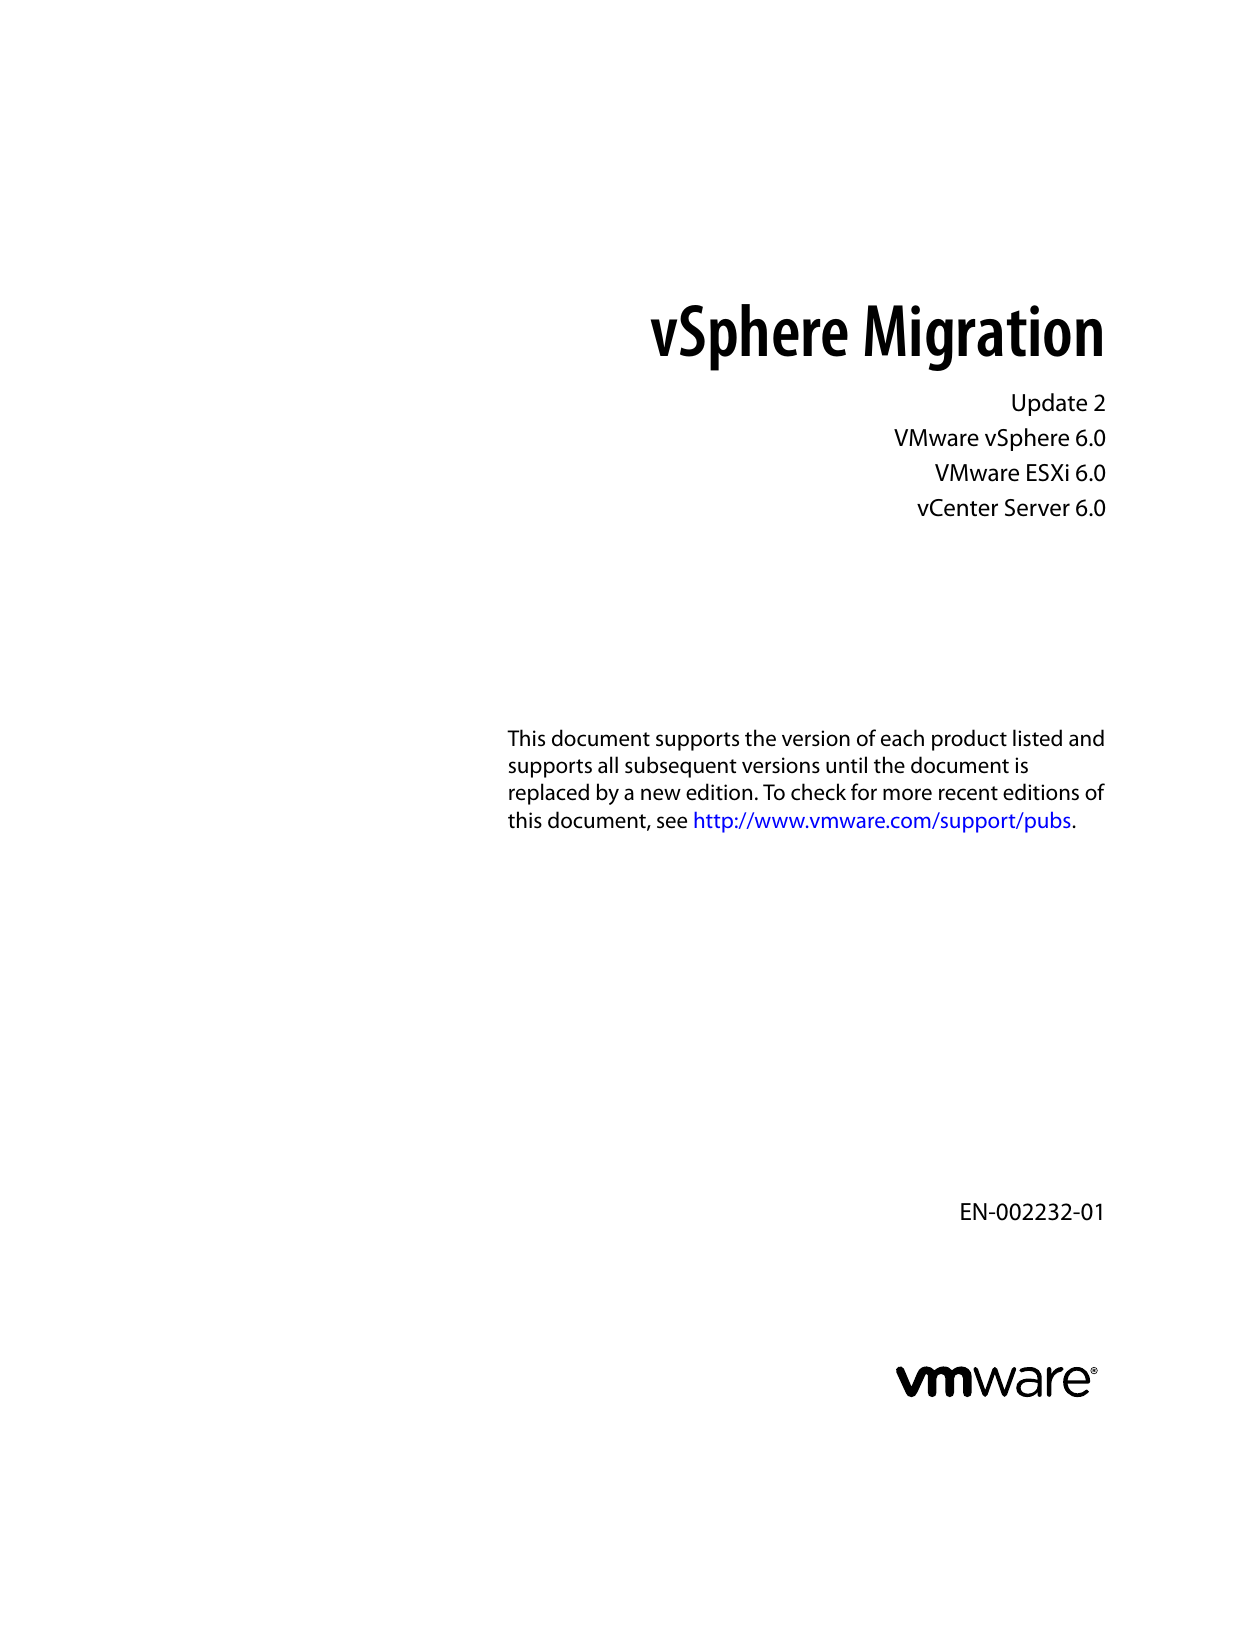 is vsphere 6.0 client backwards compatible with 5.5